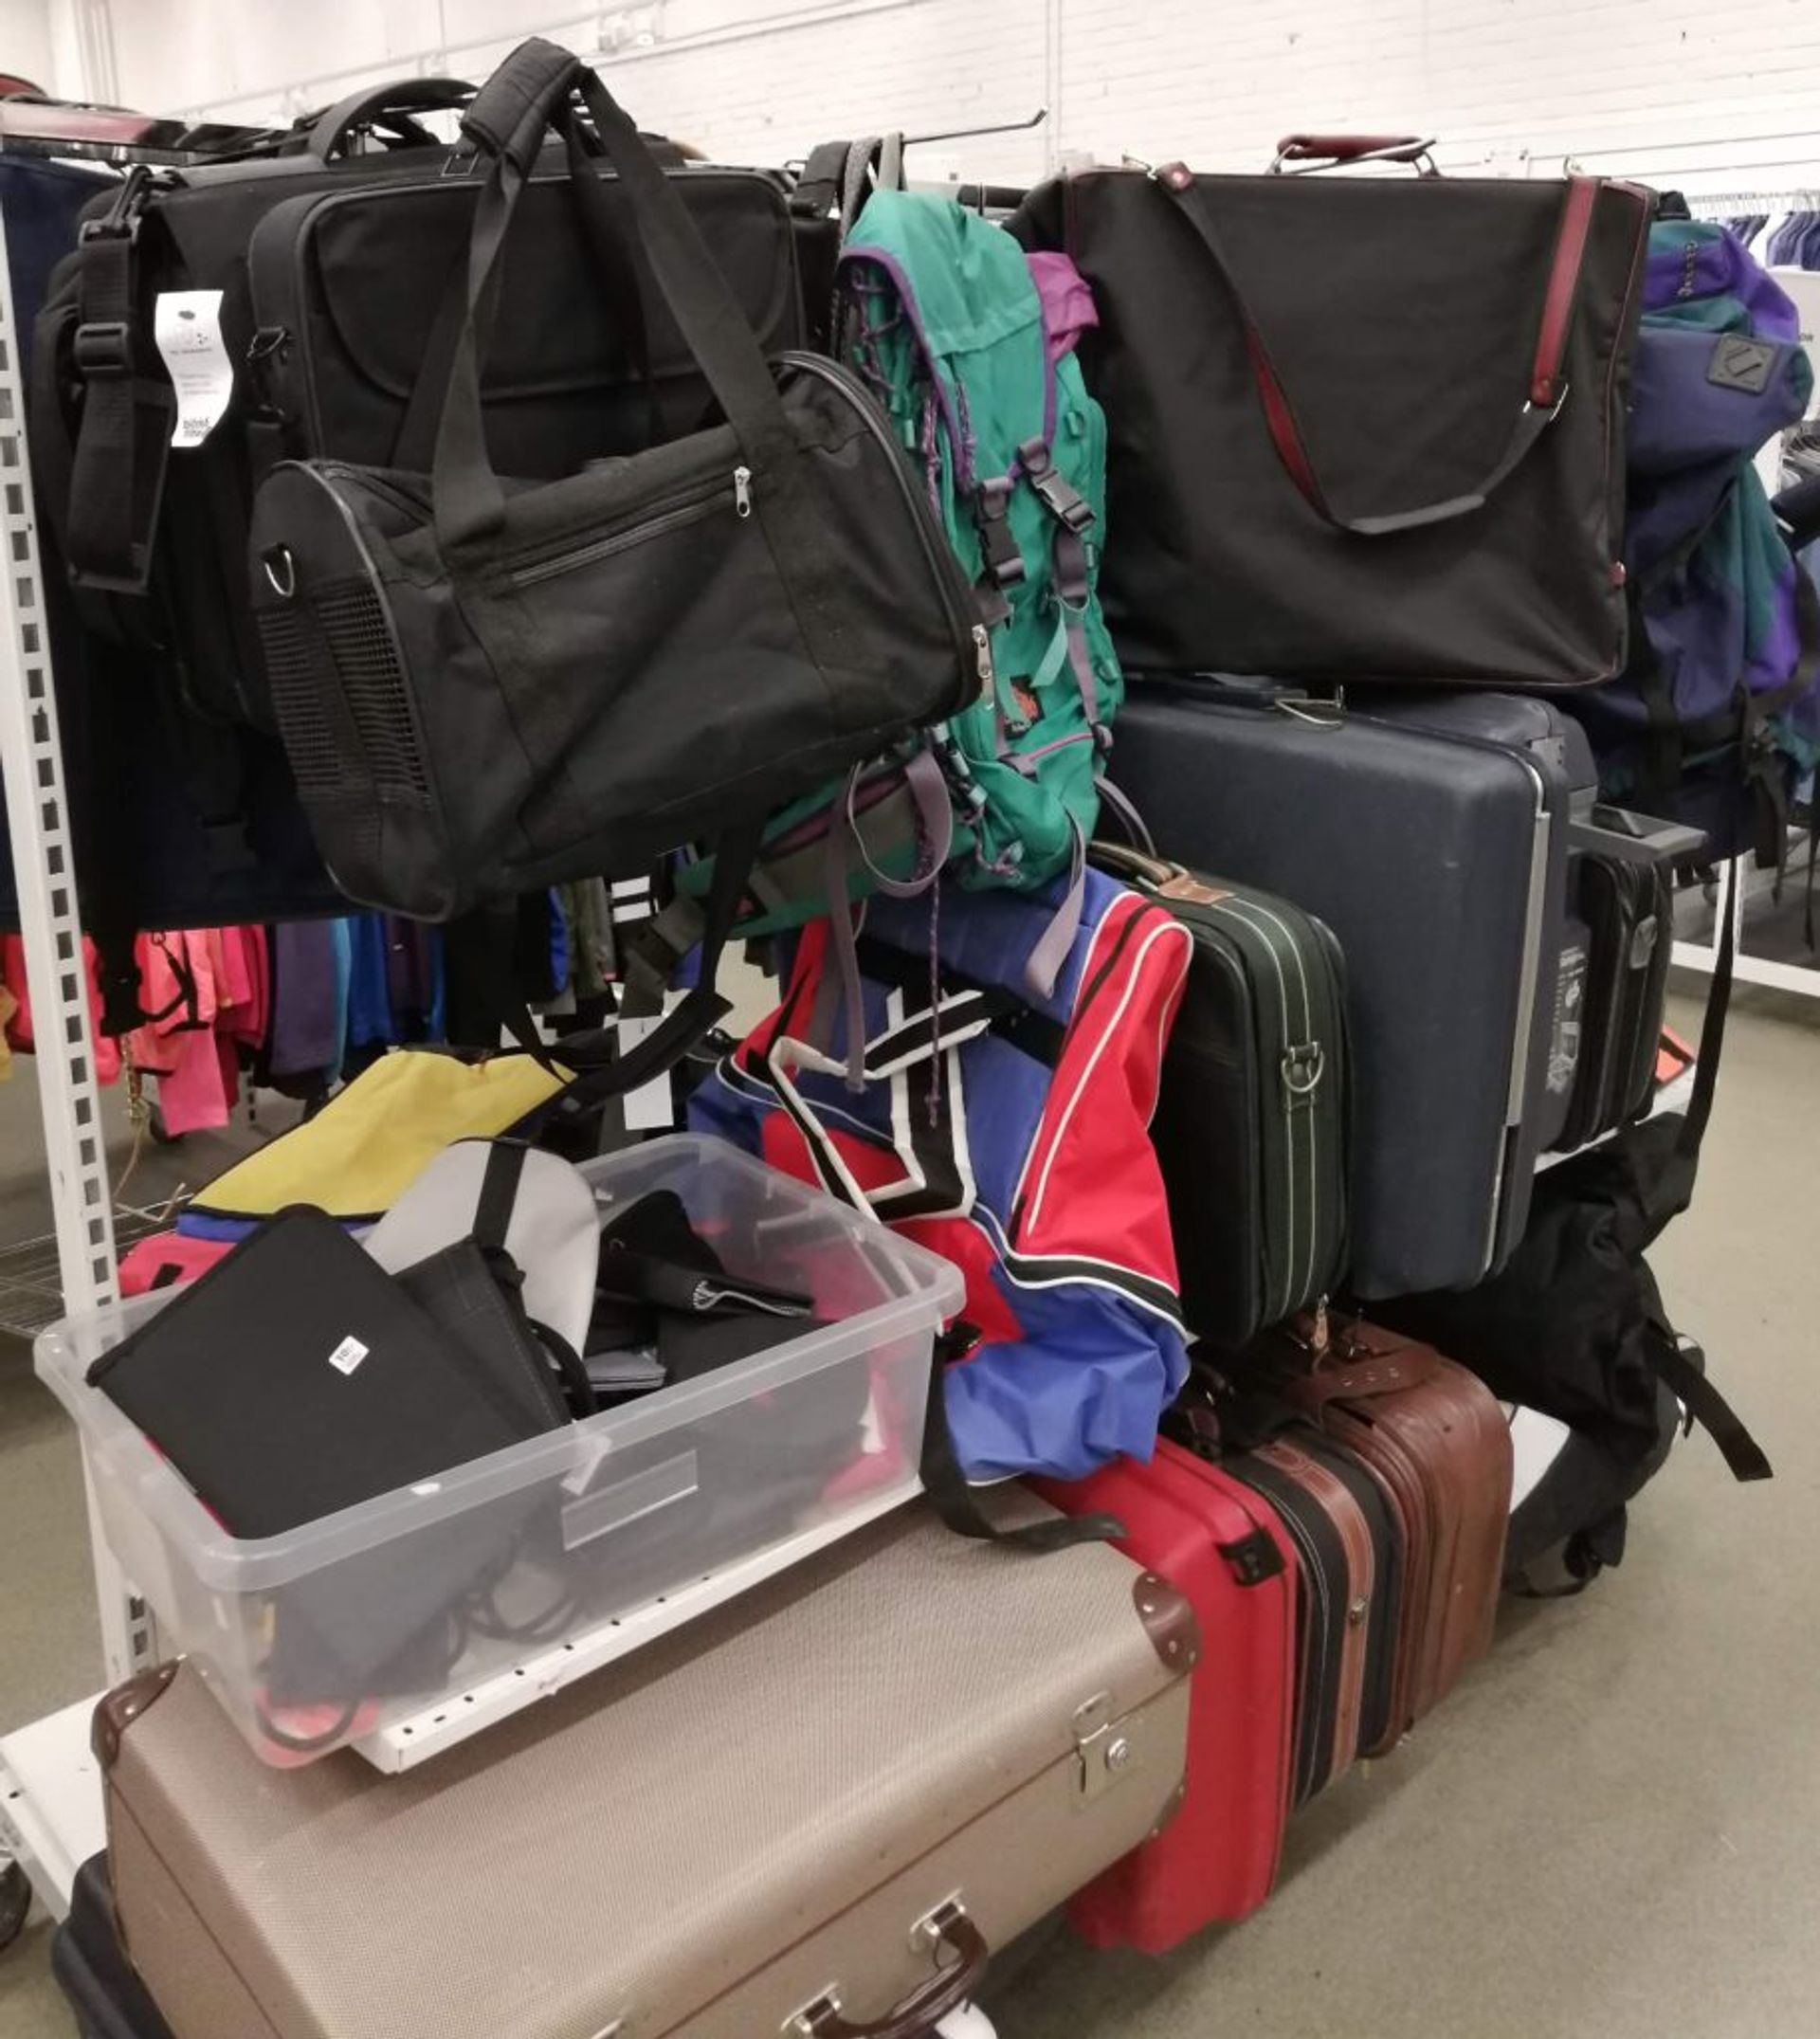 Shelves of suitcases, laptop bags and rucksacks. 